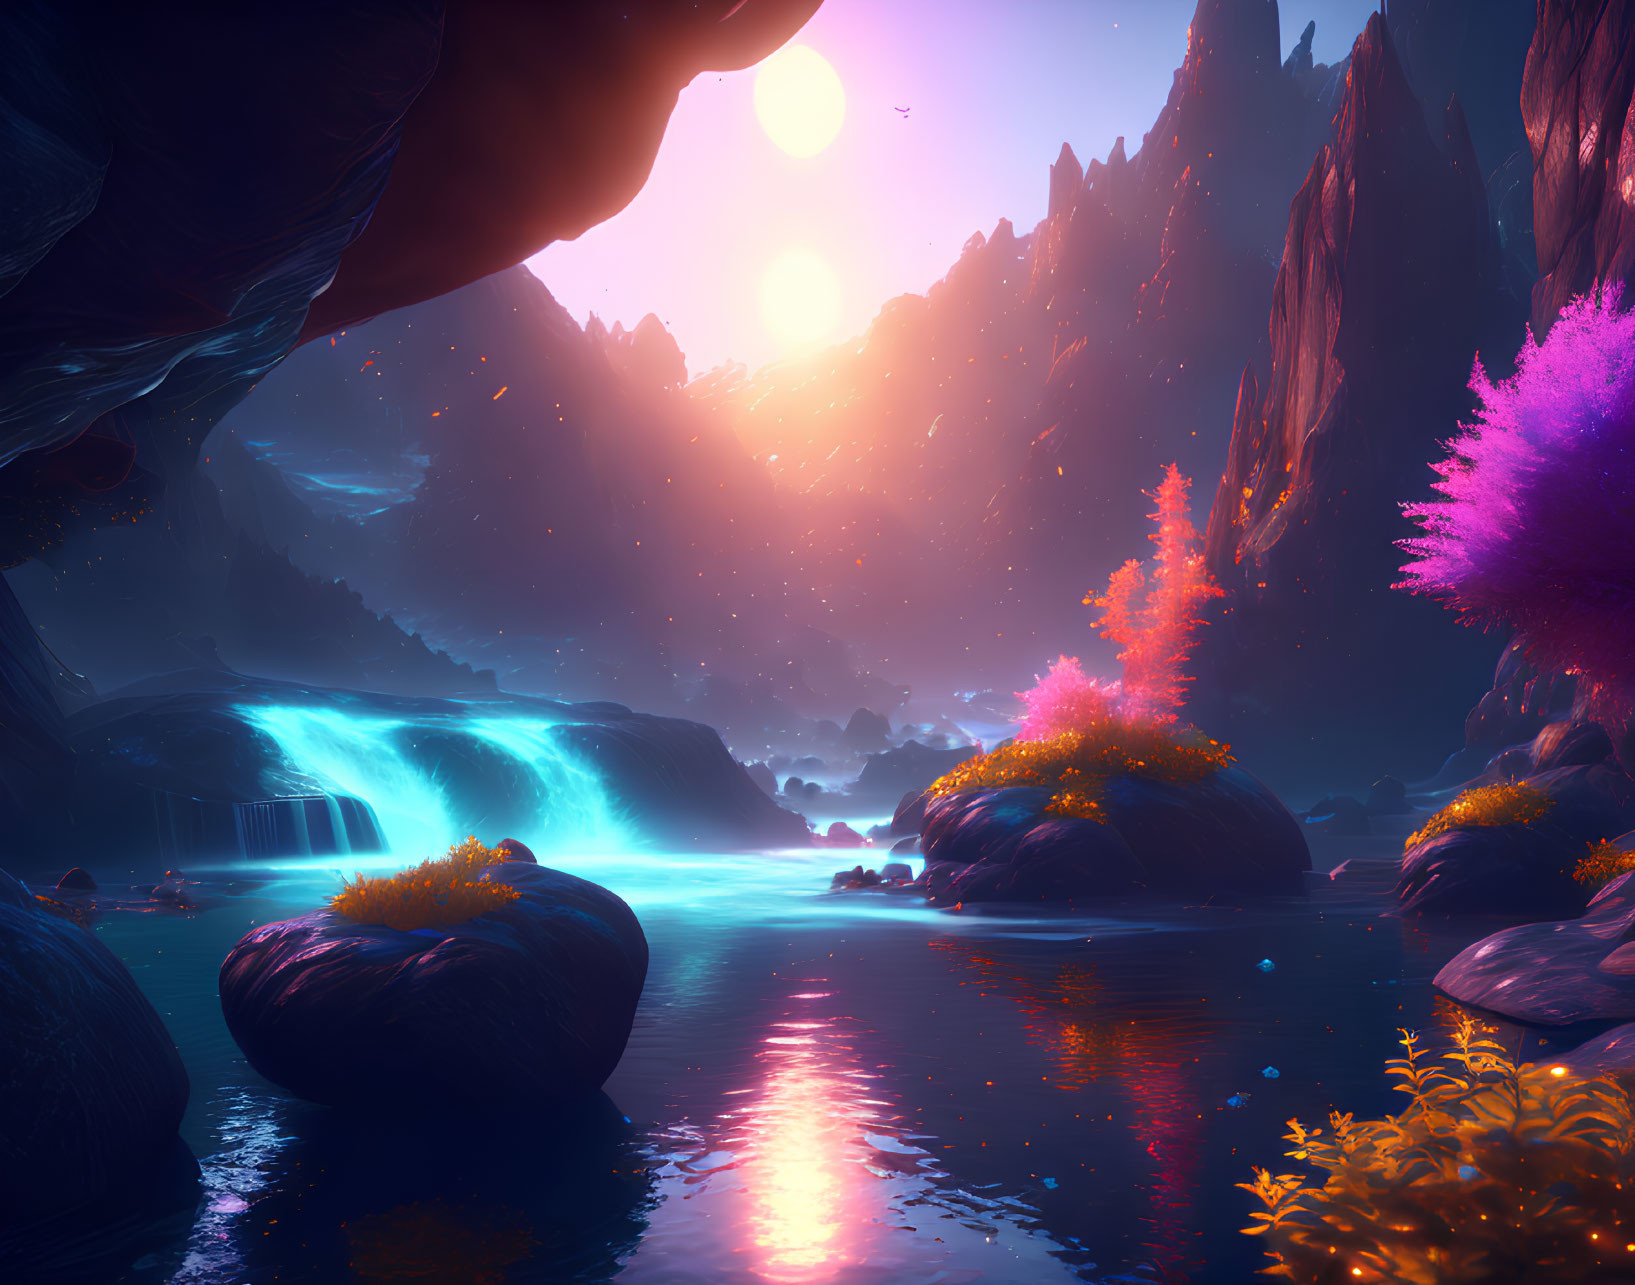 Mystical landscape with neon flora, serene river, waterfalls, pink sunset, mountains, star